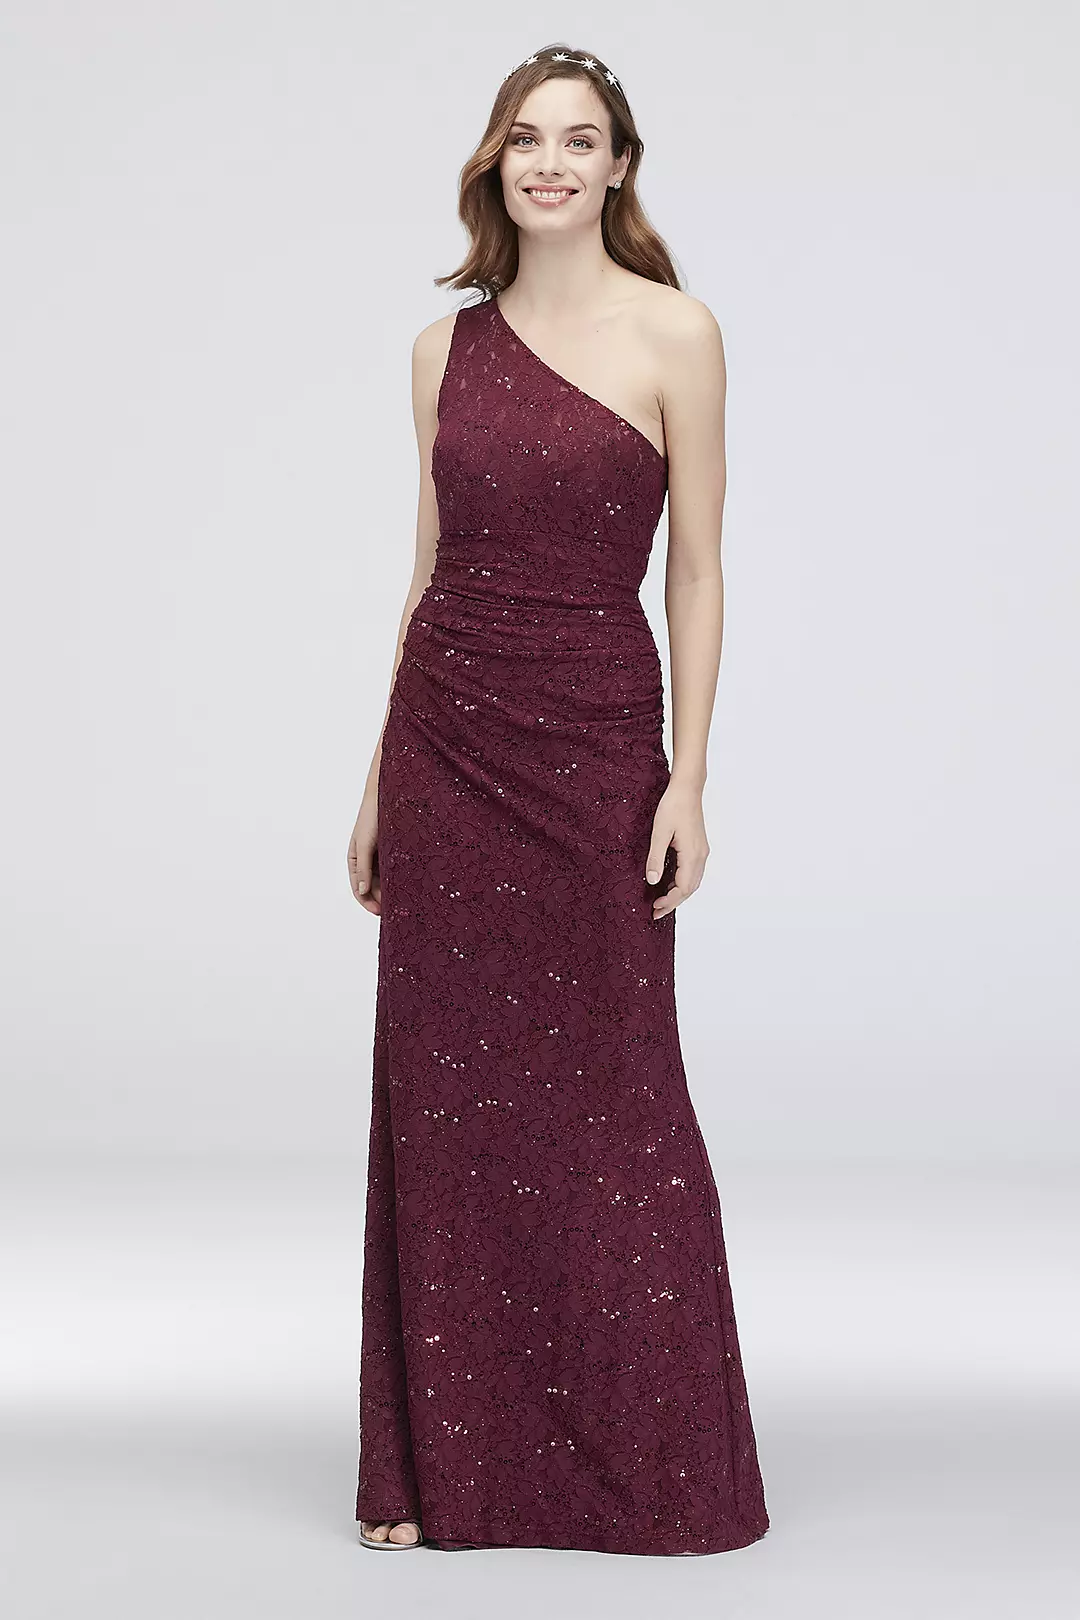 One-Shoulder Ruched Sequin Lace Mermaid Dress Image